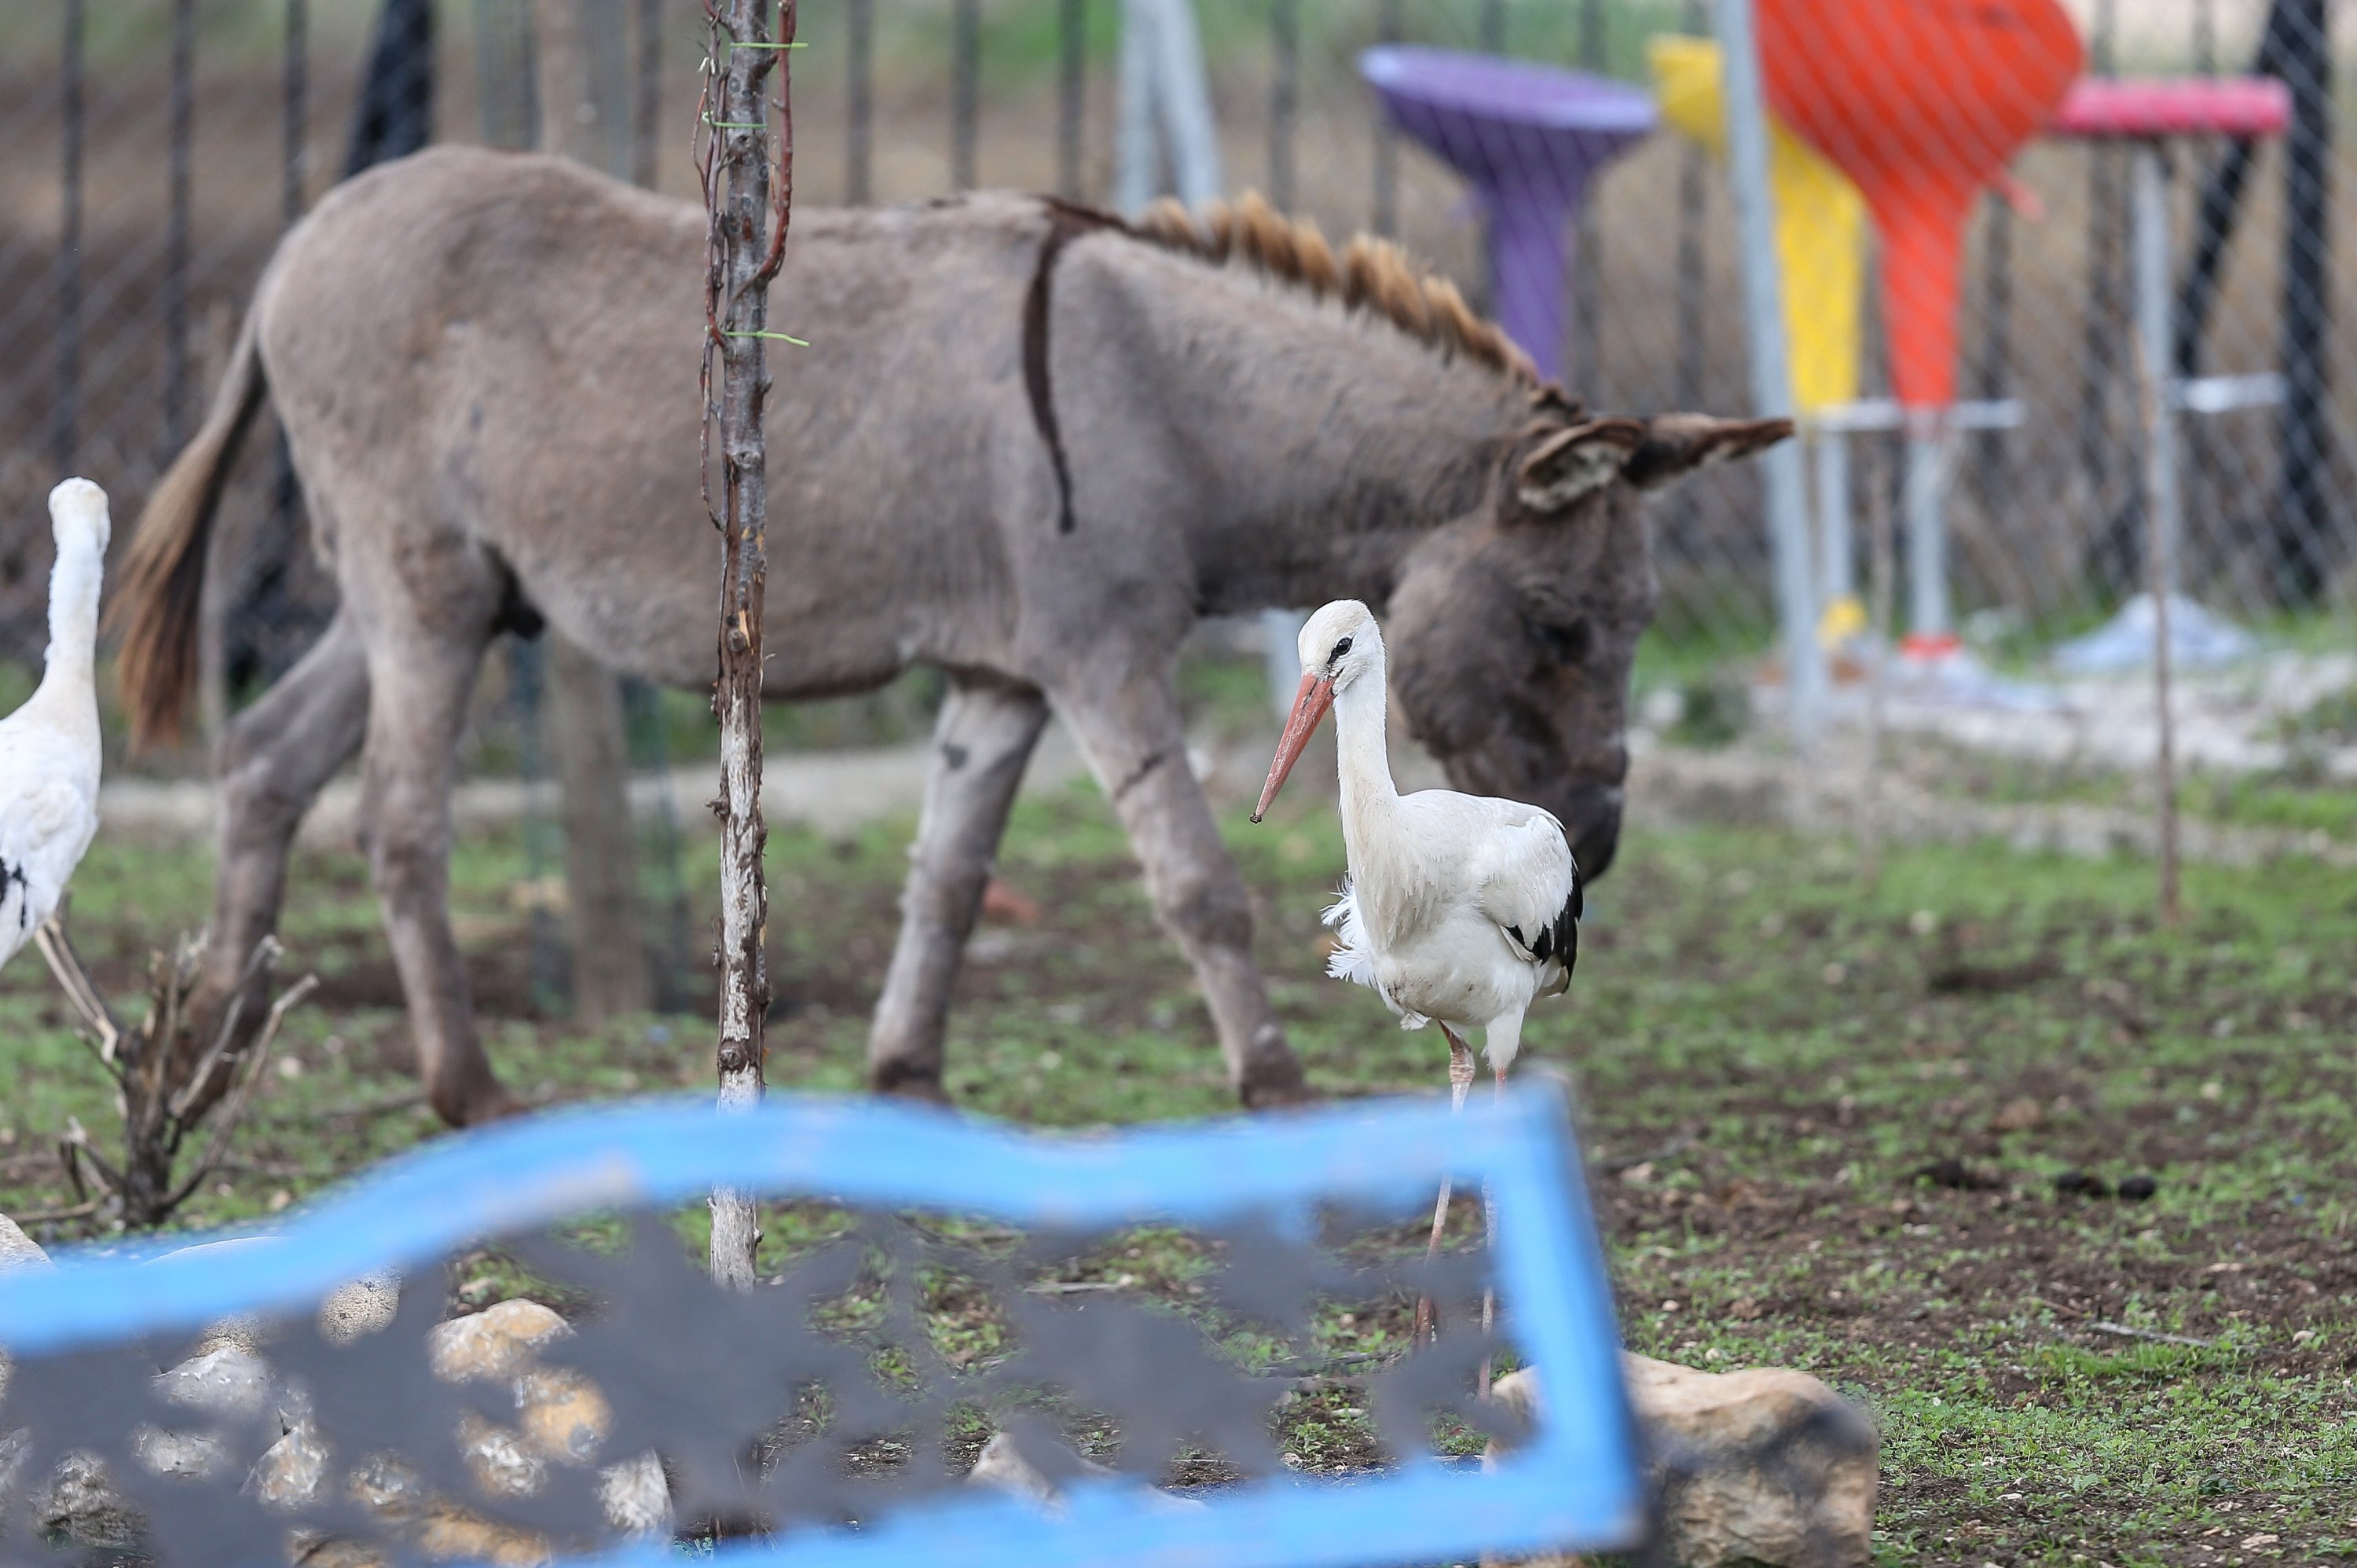 Two of the rescued storks standing in front of a donkey at the Animal Rights Federation (HAYTAP) "Retired Animals Farm" in Bursa, Turkey, Nov. 10, 2021. (AA Photo)